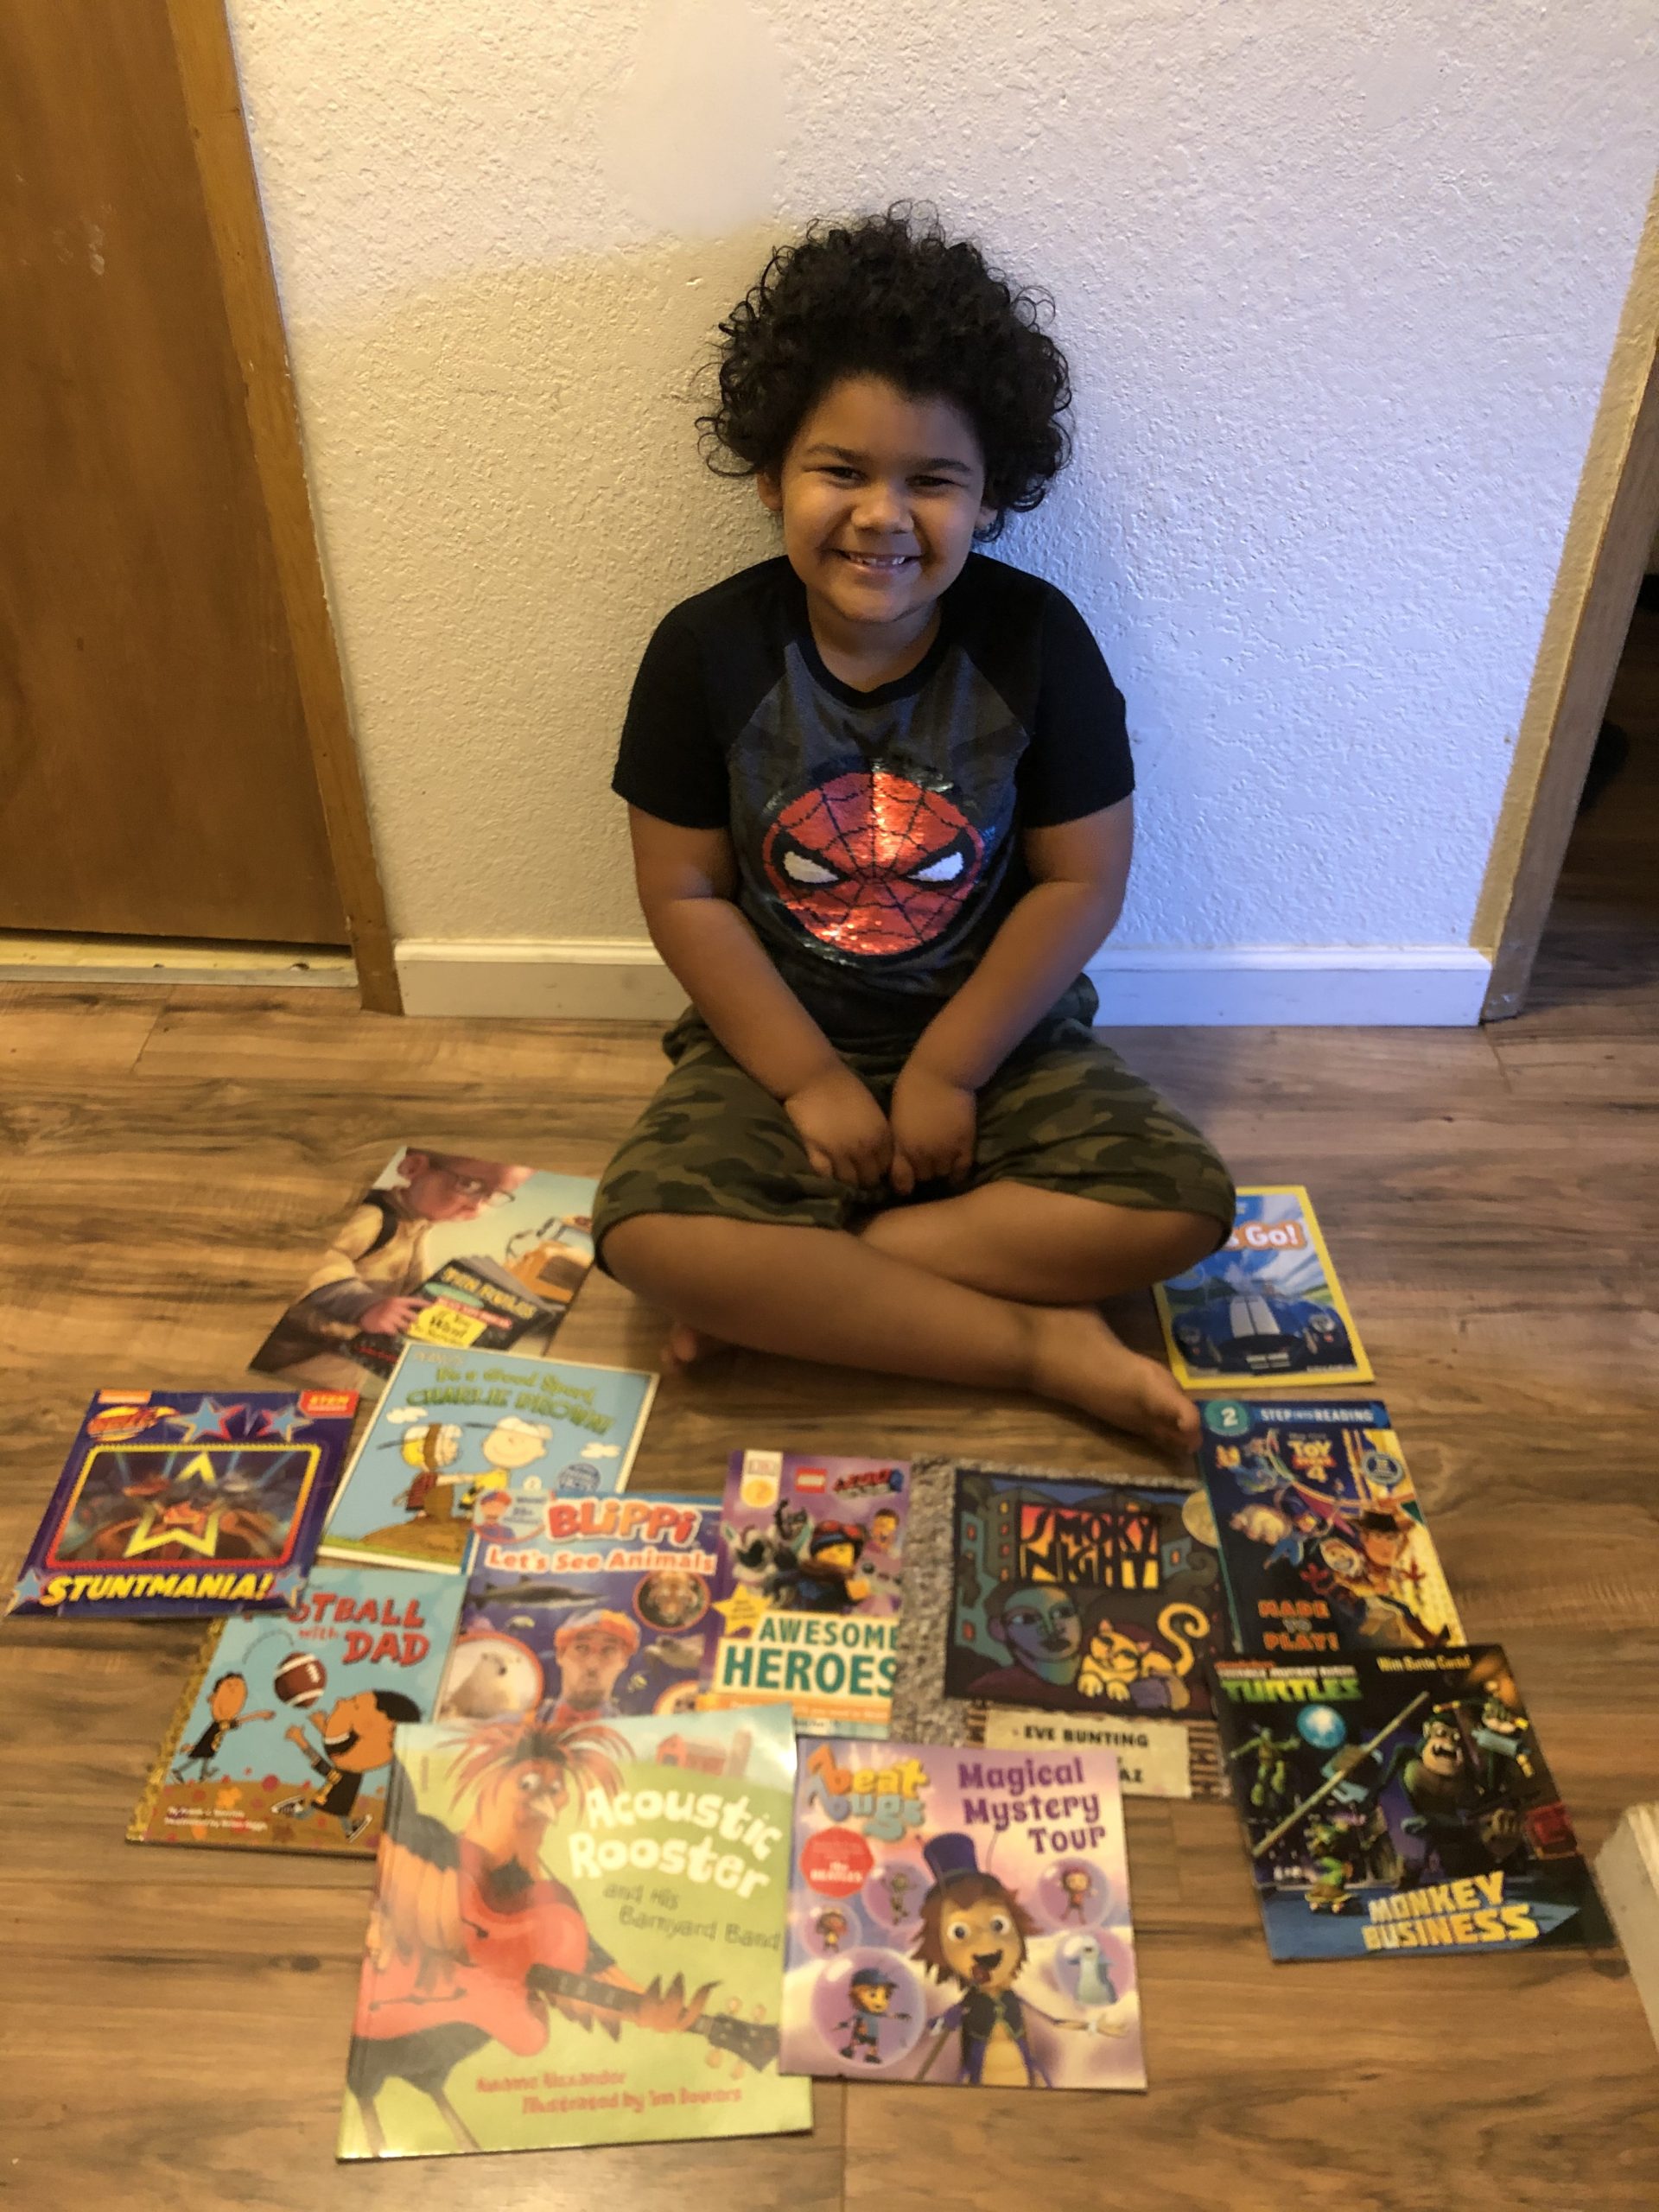 17,000 kids had books at home this summer because of supporters like you!